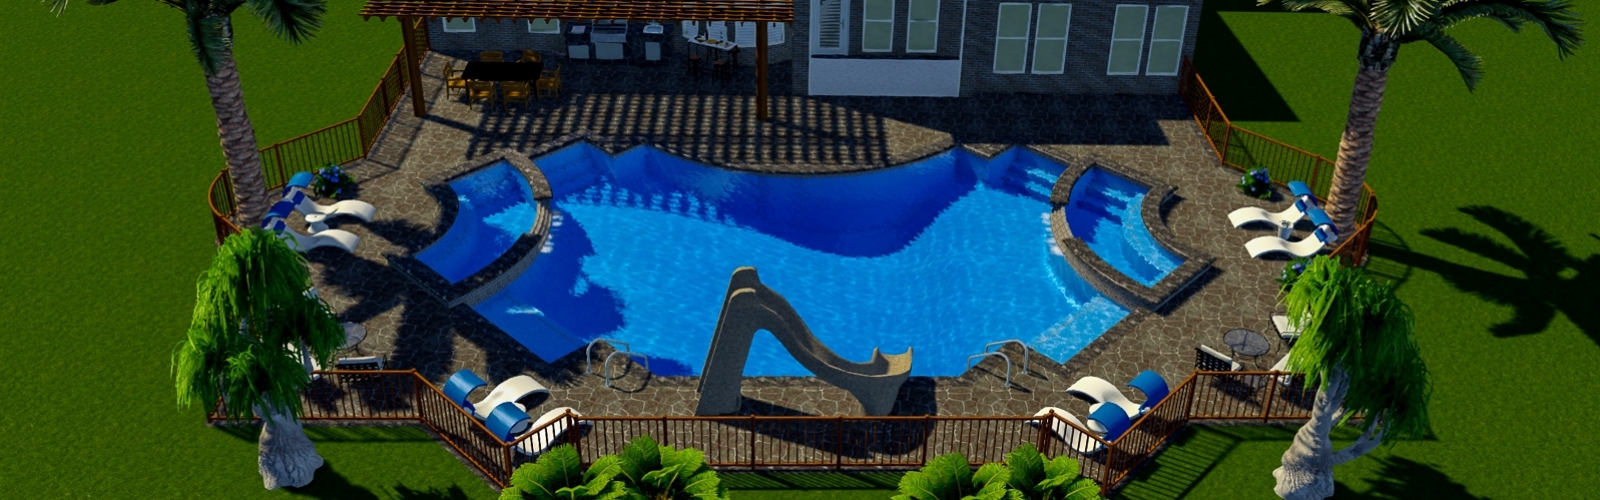 Texas Fast Pool and Spa